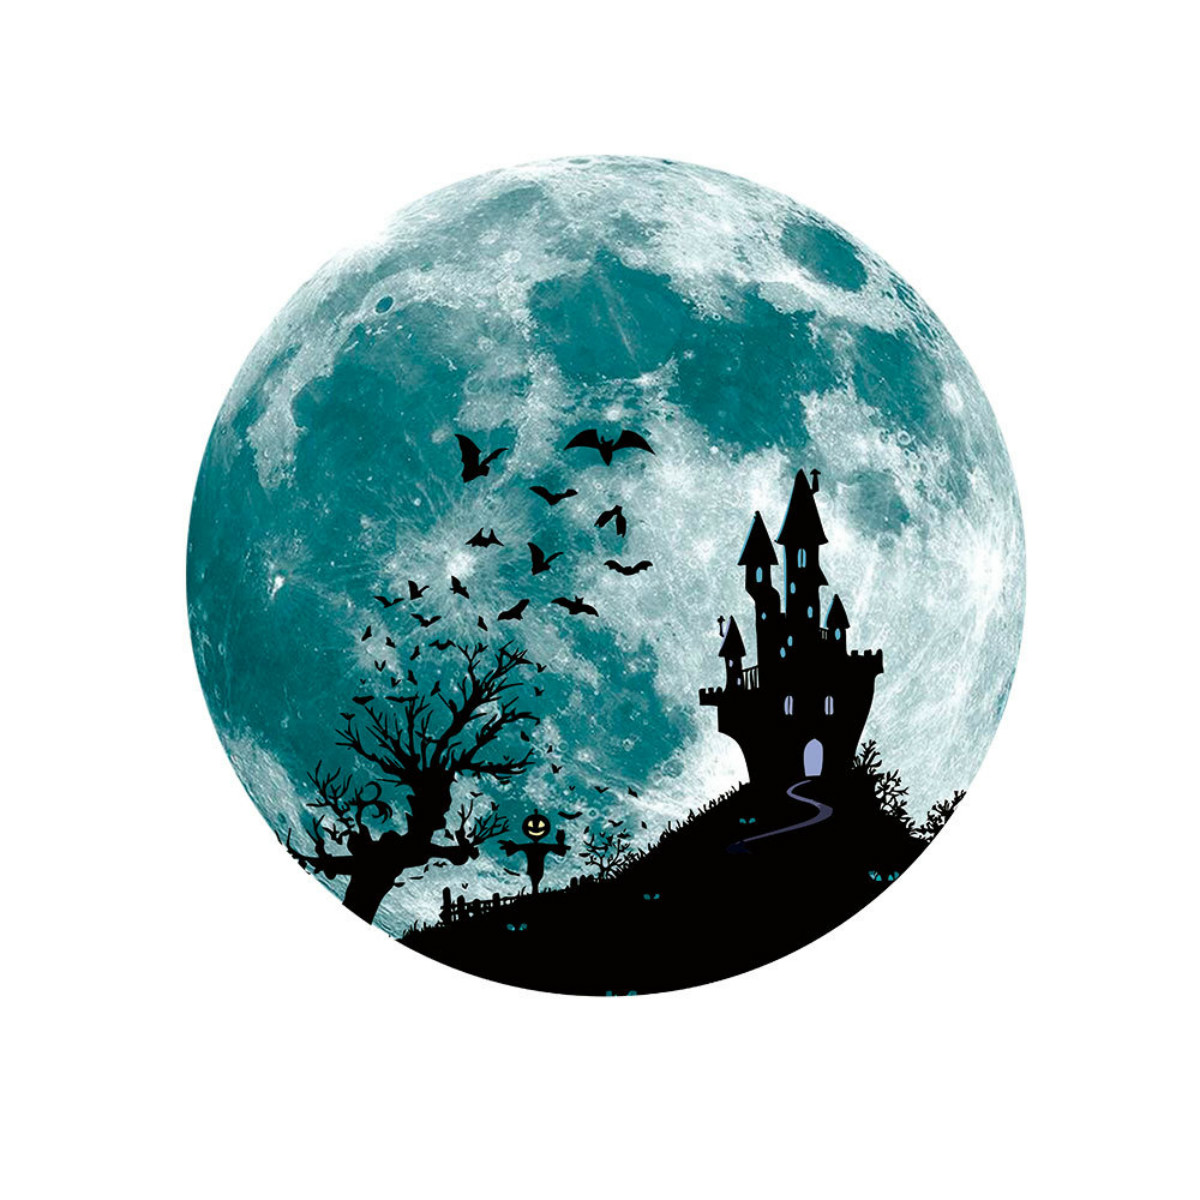 Halloween-Moon-Bat-Glow-In-Dark-Wall-Sticker-Luminous-Removable-Party-Room-Decorations-1585181-7